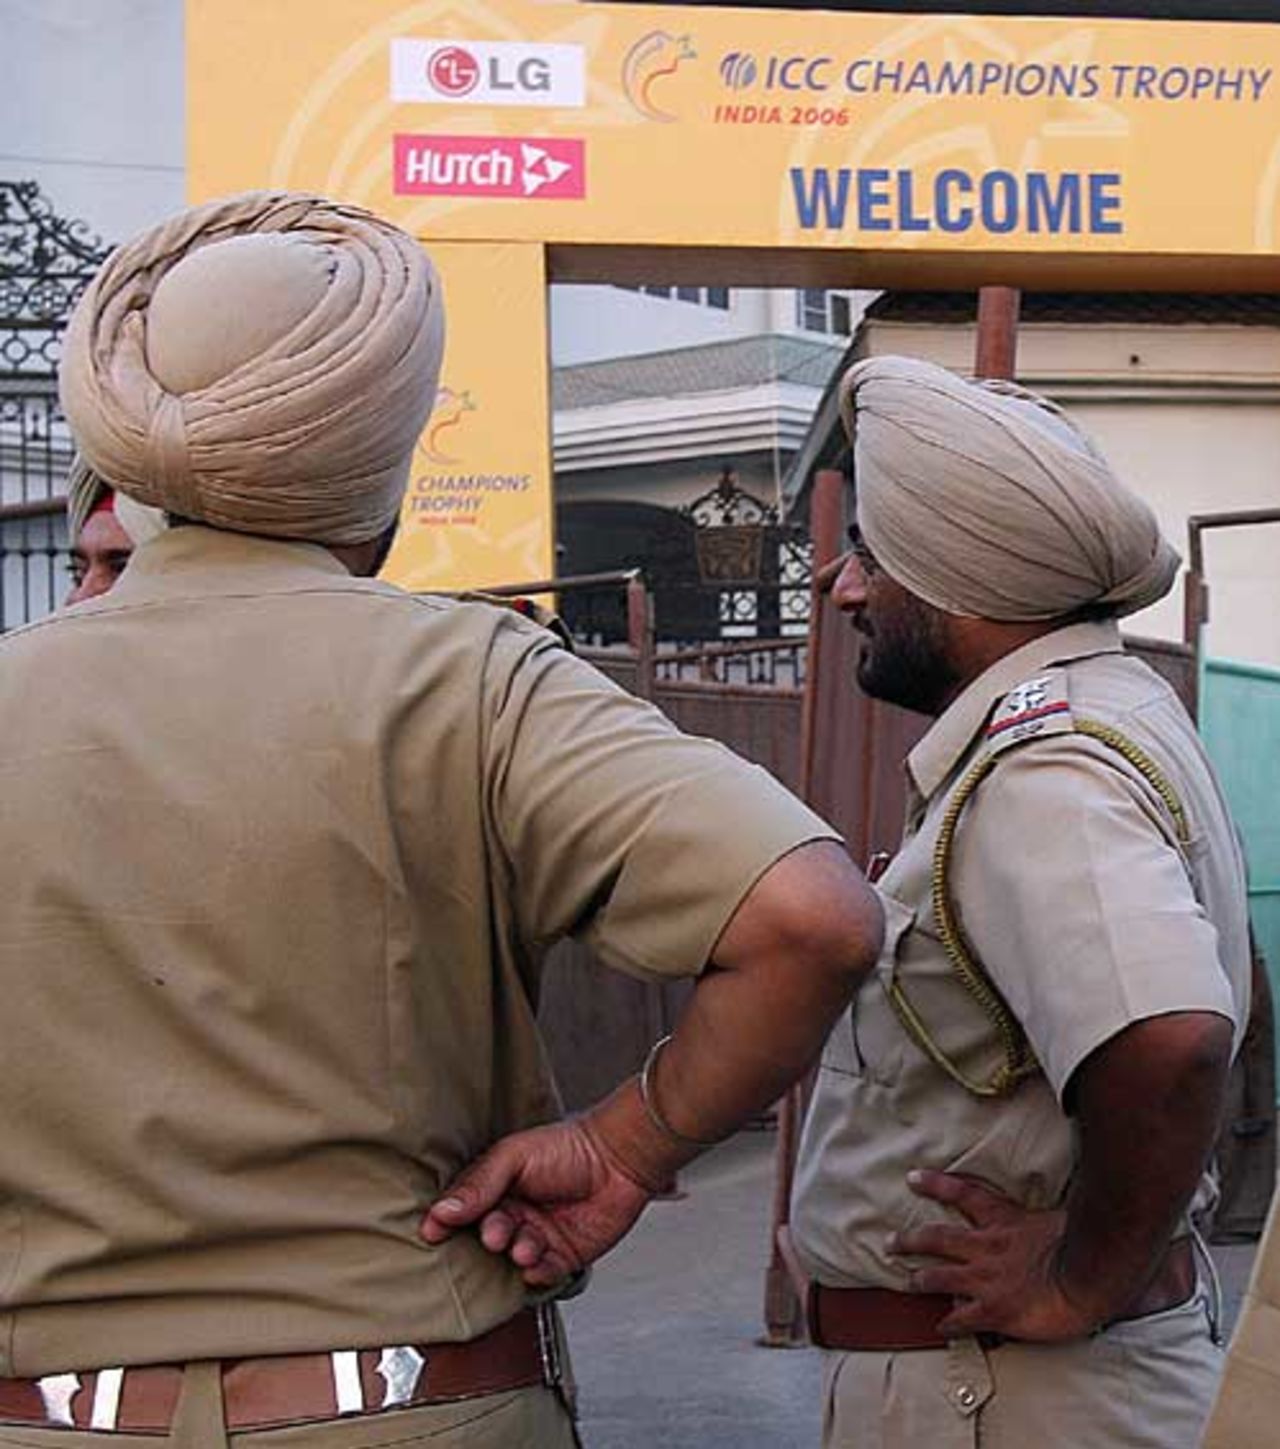 Indian police patrol outside the Punjab Cricket Association ground which will be hosting Champions Trophy matches, Mohali, October 6, 2006